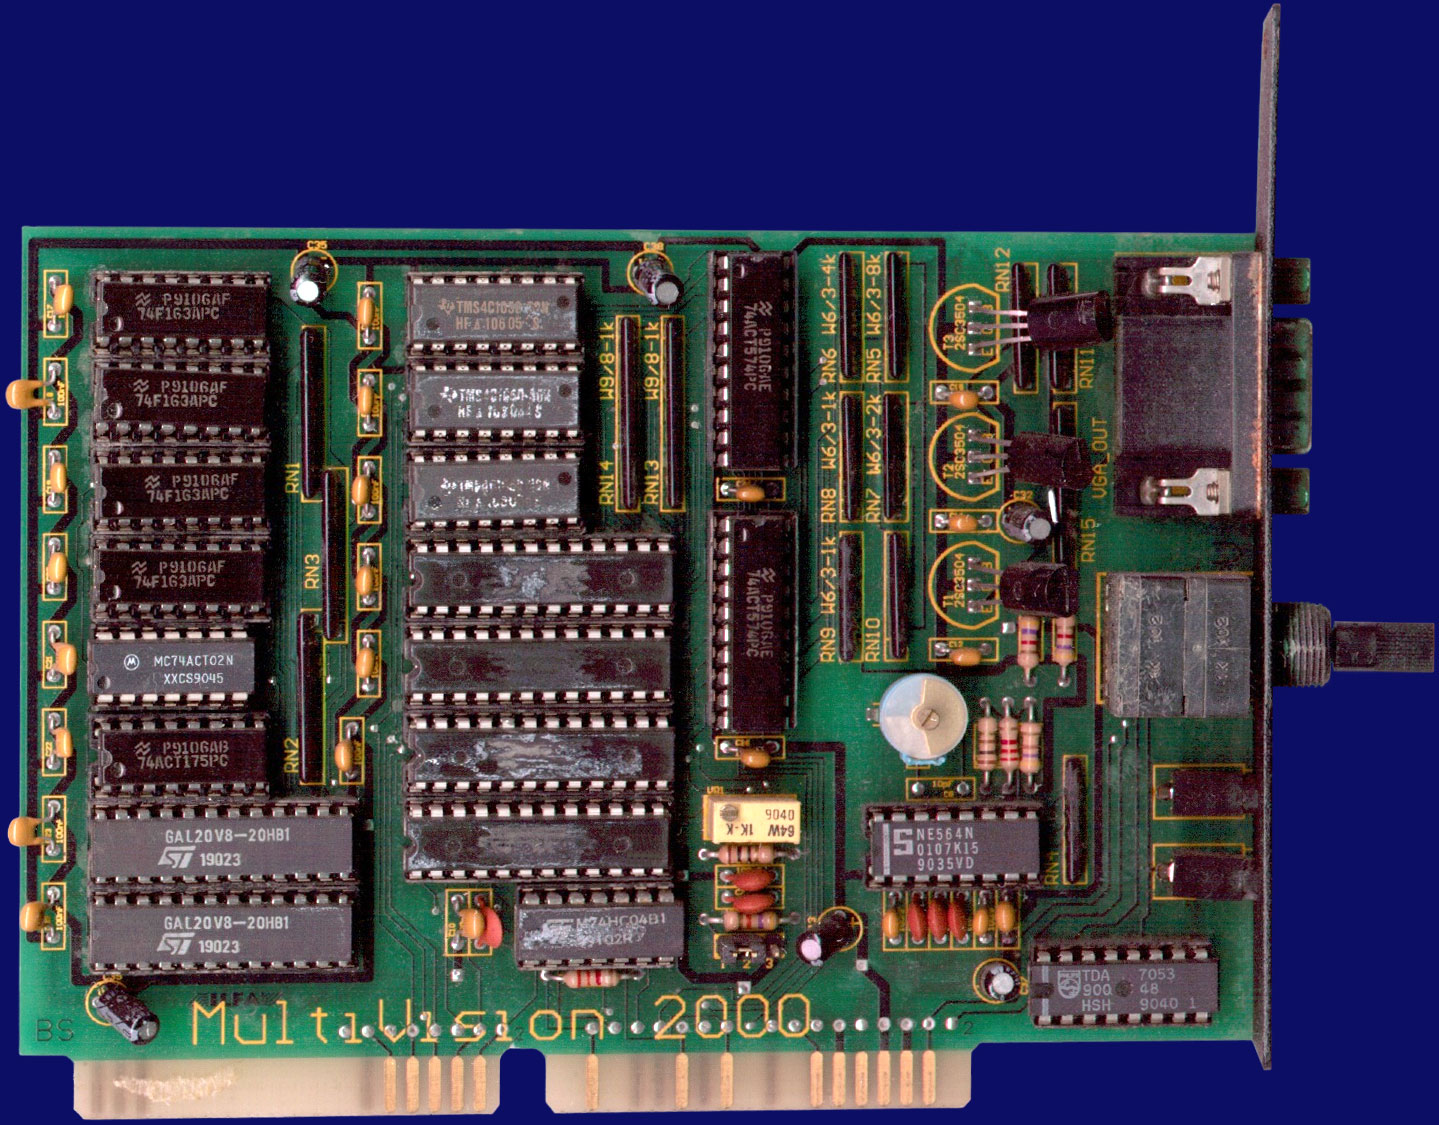 3-State MultiVision 2000 - front side